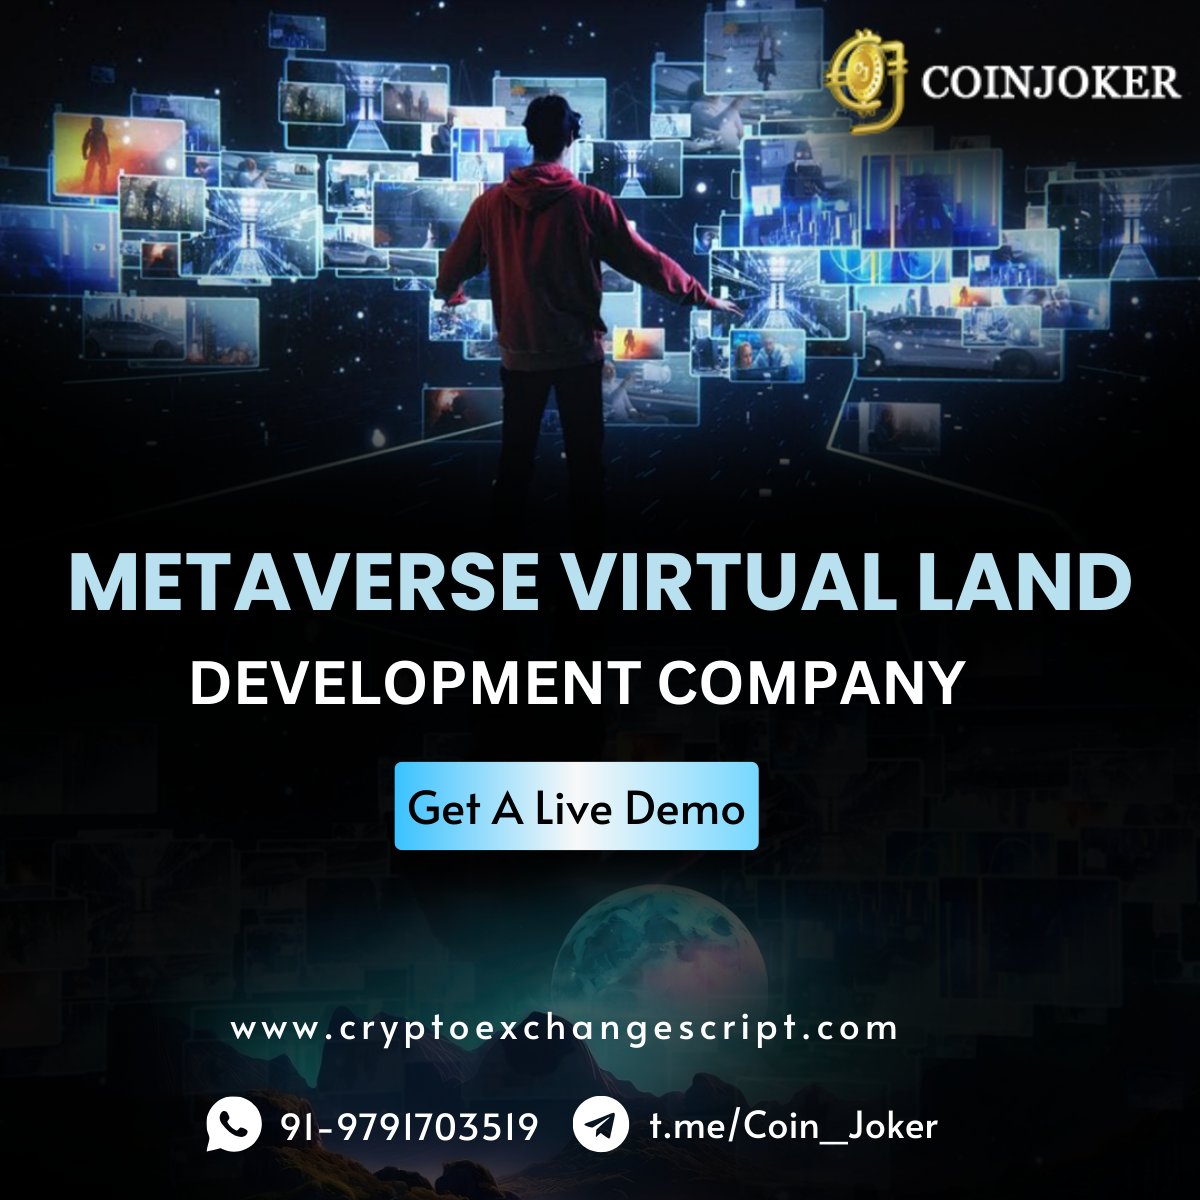 Welcome to the future of immersive experiences!

Ready to make your mark in the metaverse >> tinyurl.com/4cavfrub

#MetaverseDevelopment #VirtualLand #DigitalRealEstate #MetaverseEconomy #ImmersiveSpace #FutureOfVirtualReality #MetaverseInvesting #DigitalWorldBuilding